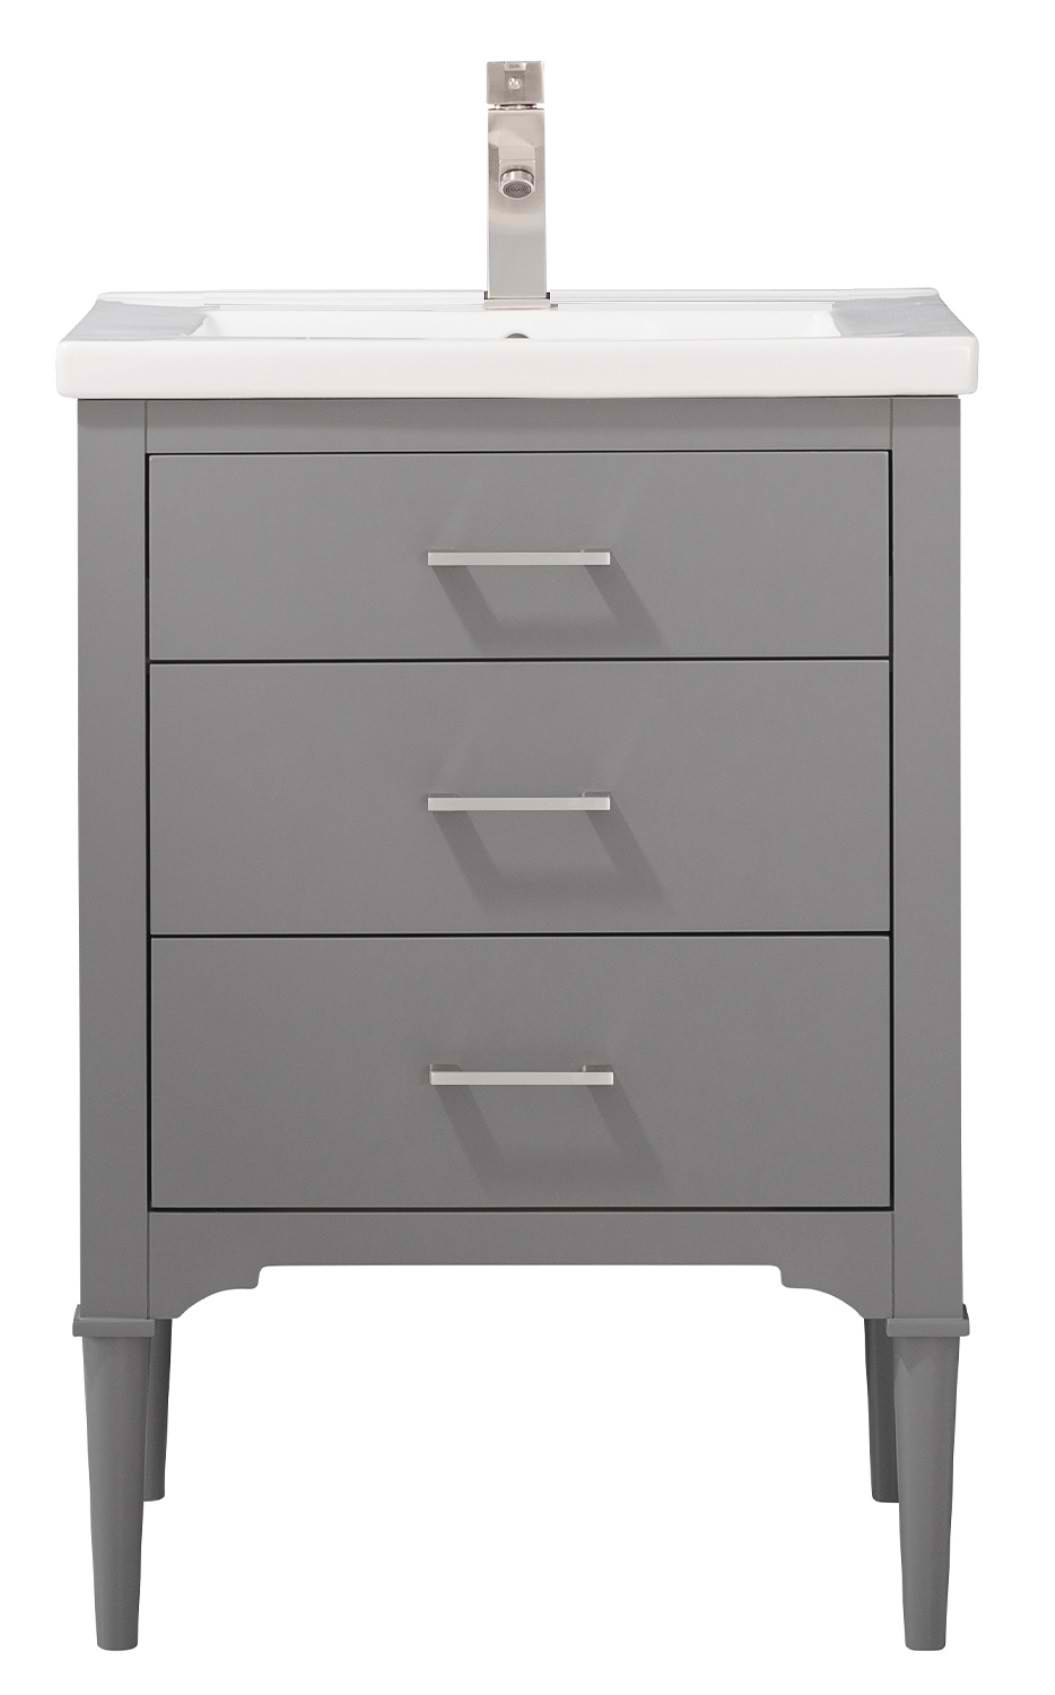 24" Transitional Single Sink Vanity with Porcelain Integrated Counterop and Sink in Gray Finish